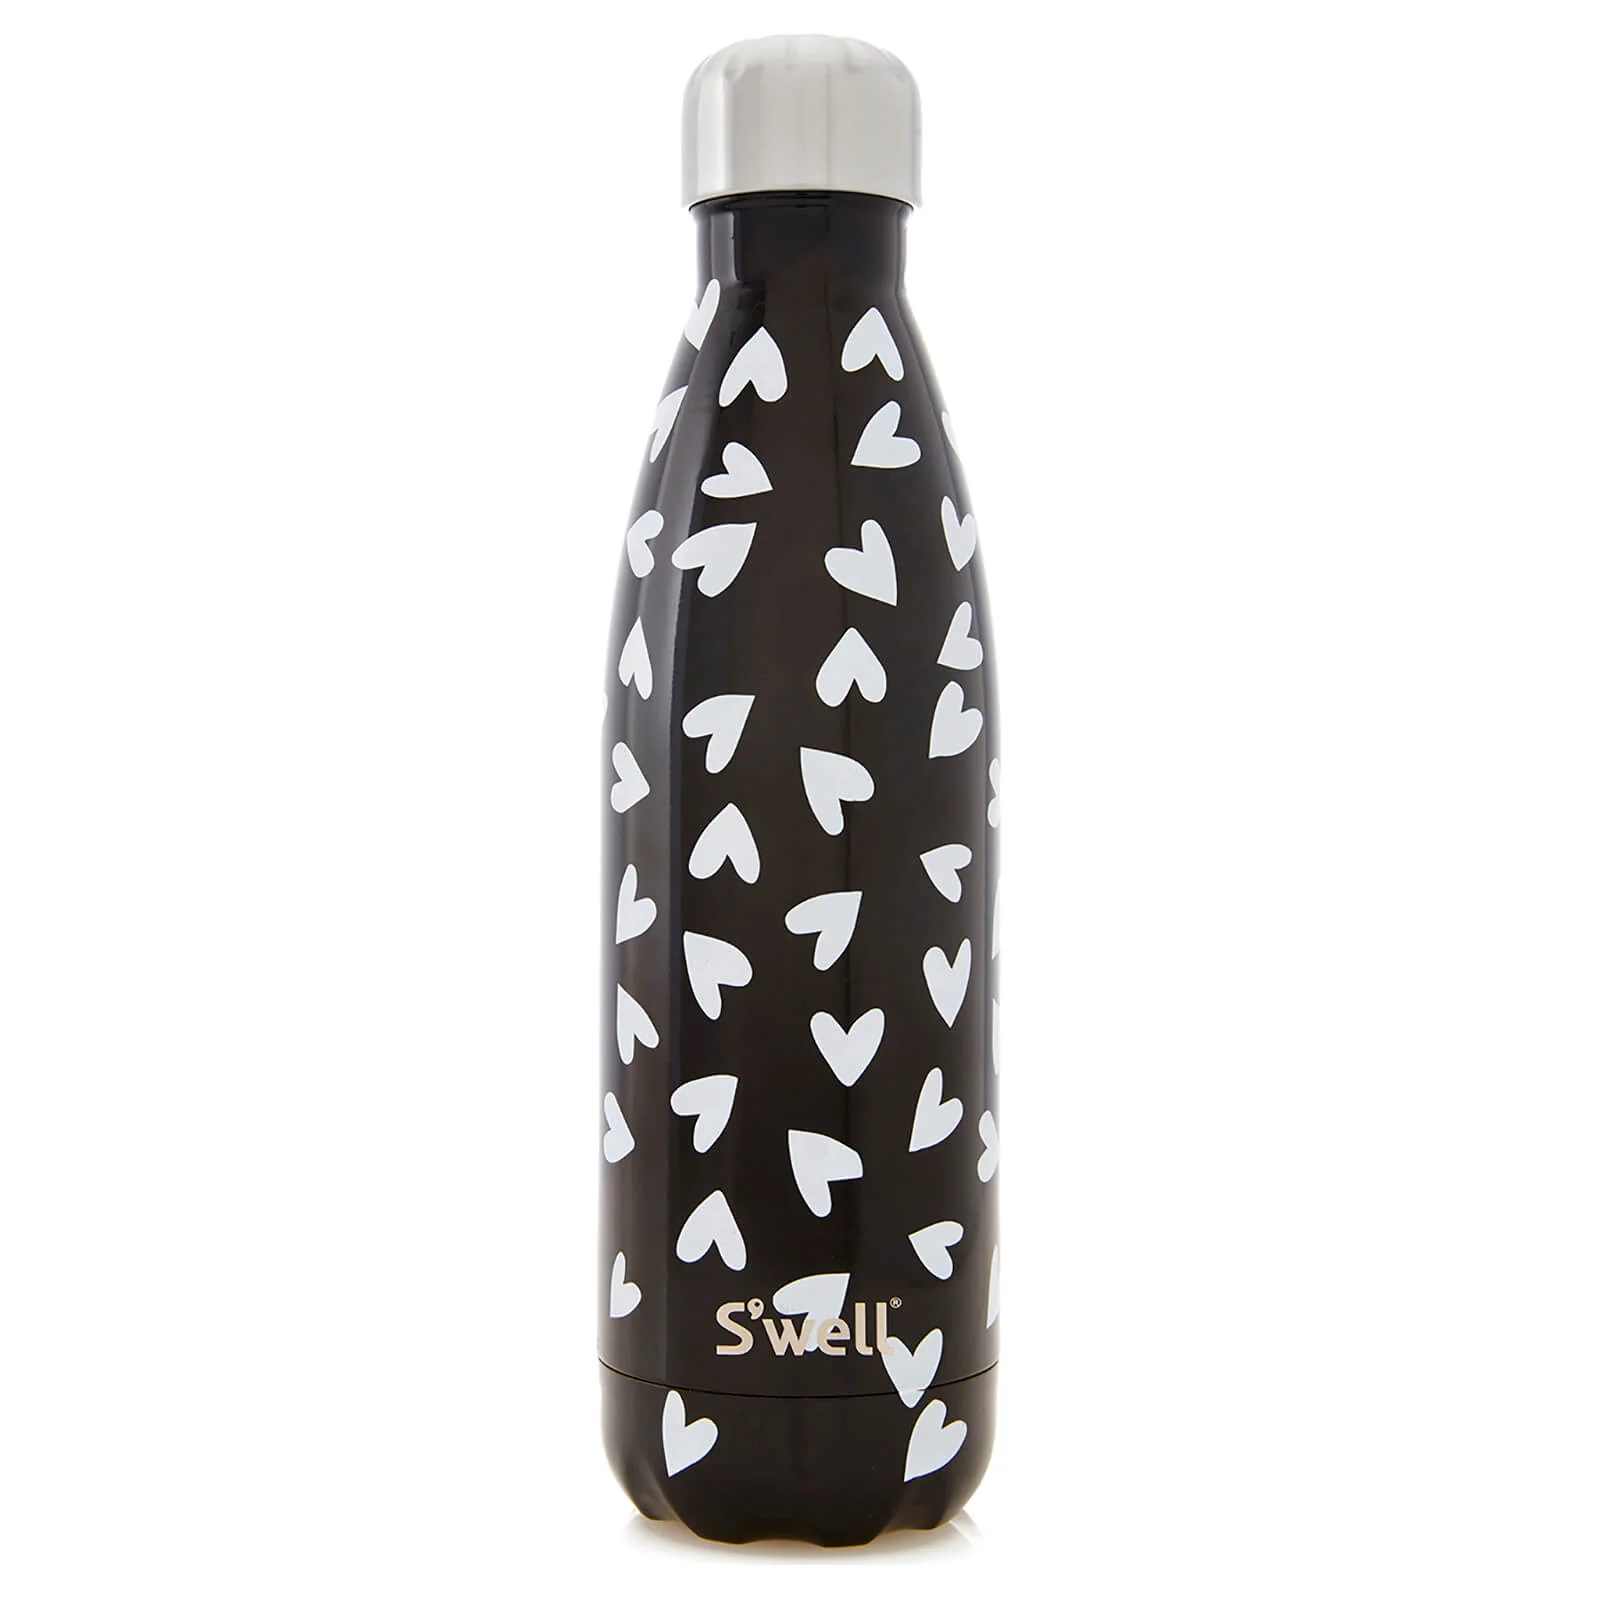 S'well The Love Light Hearted Water Bottle 500ml Image 1